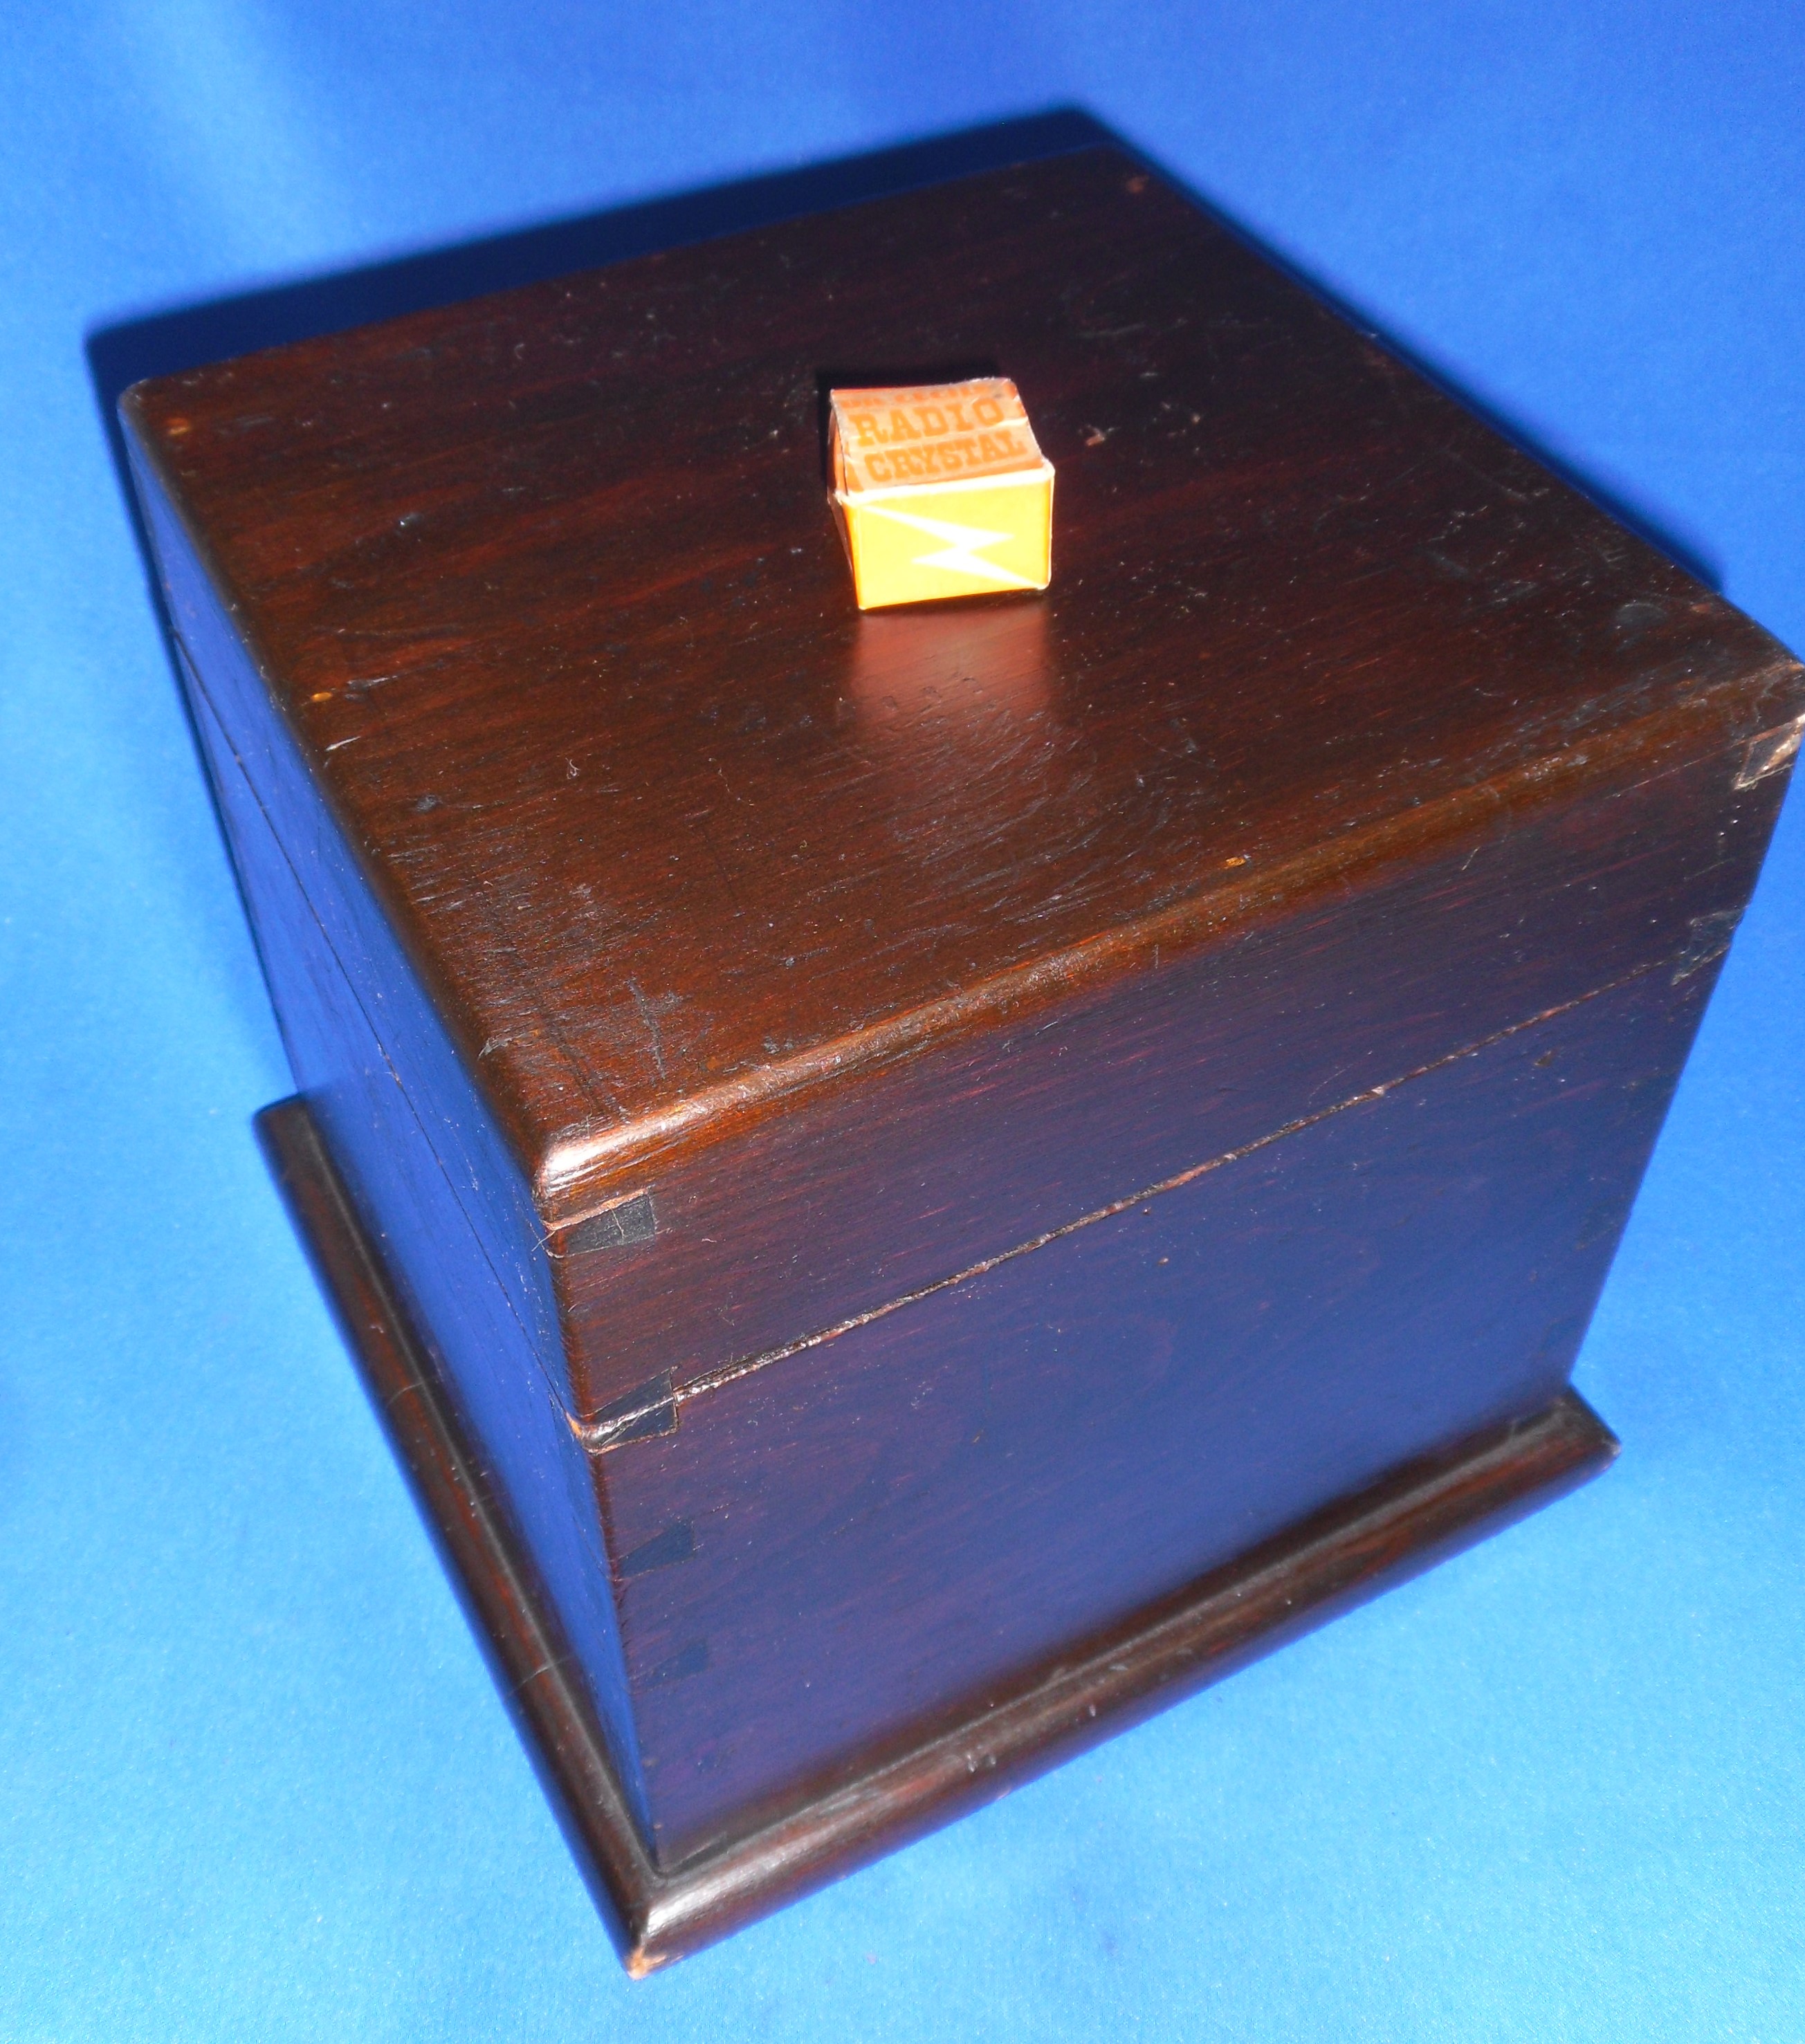 Antique Crystal Radio Believed a "The Post Office Box" Boxed Dr CECIL Crystal - Image 5 of 8